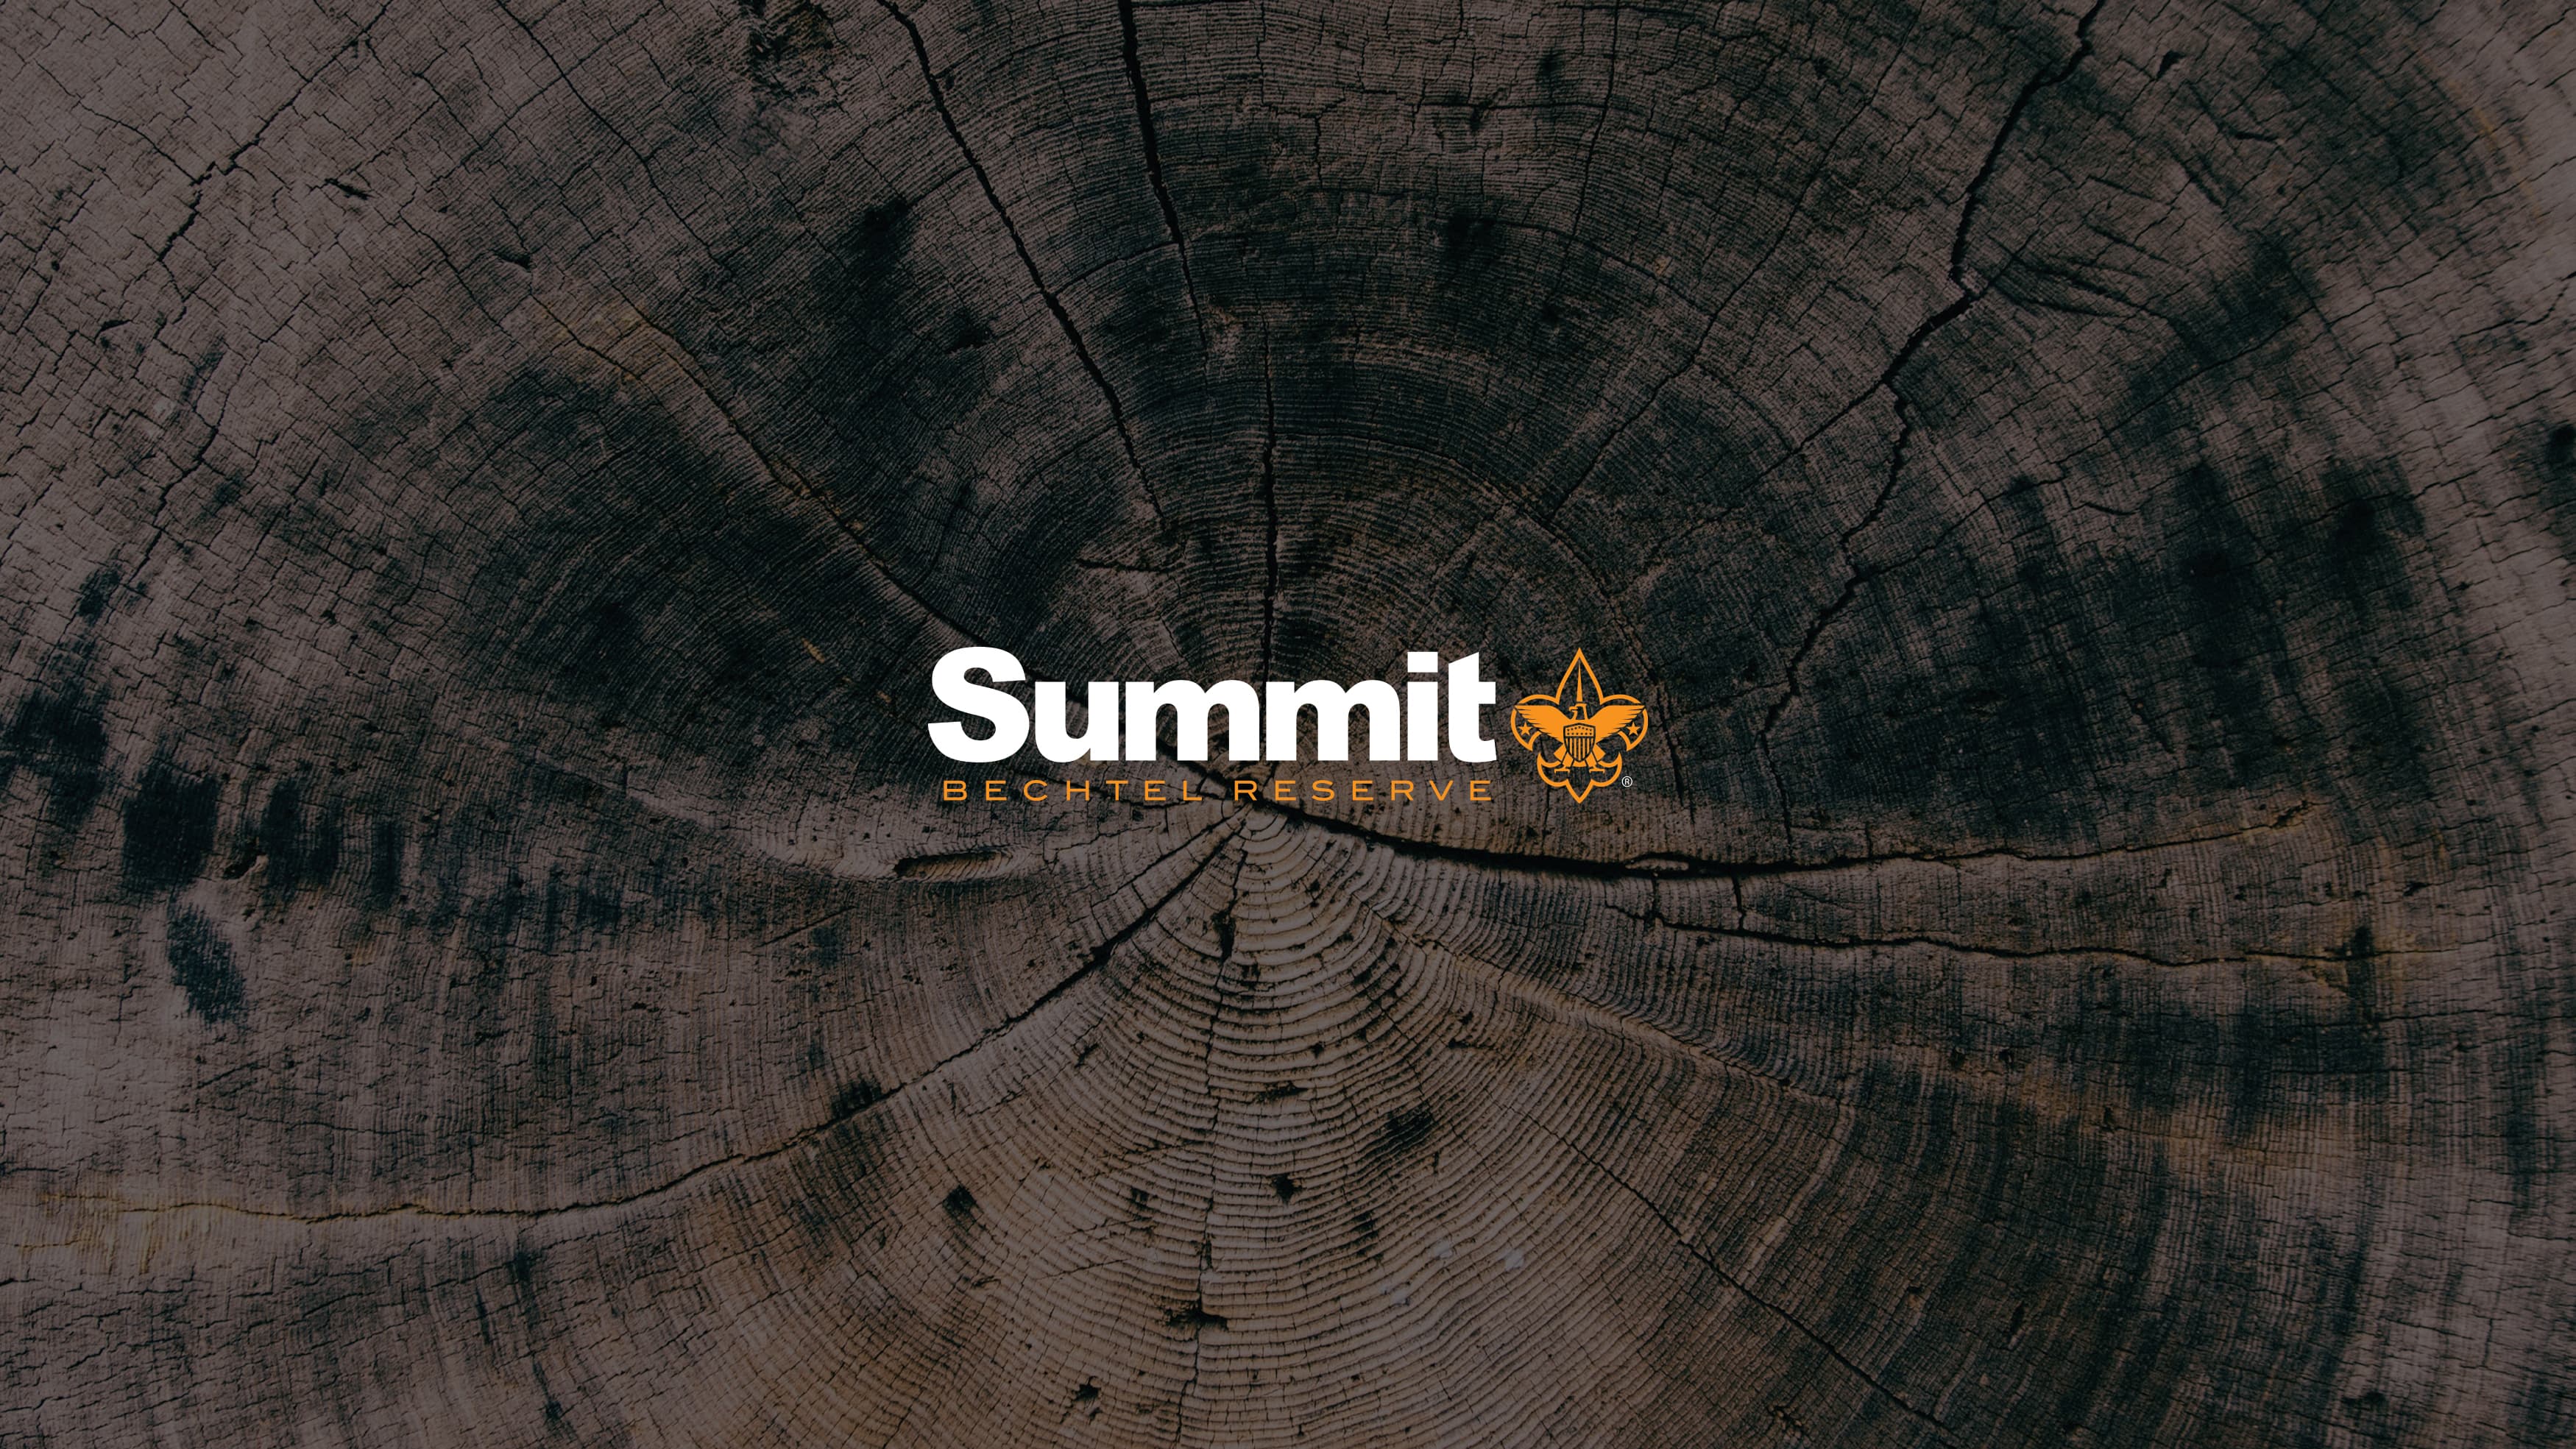 Logo for The Summit shown on top of a tree trunk texture.